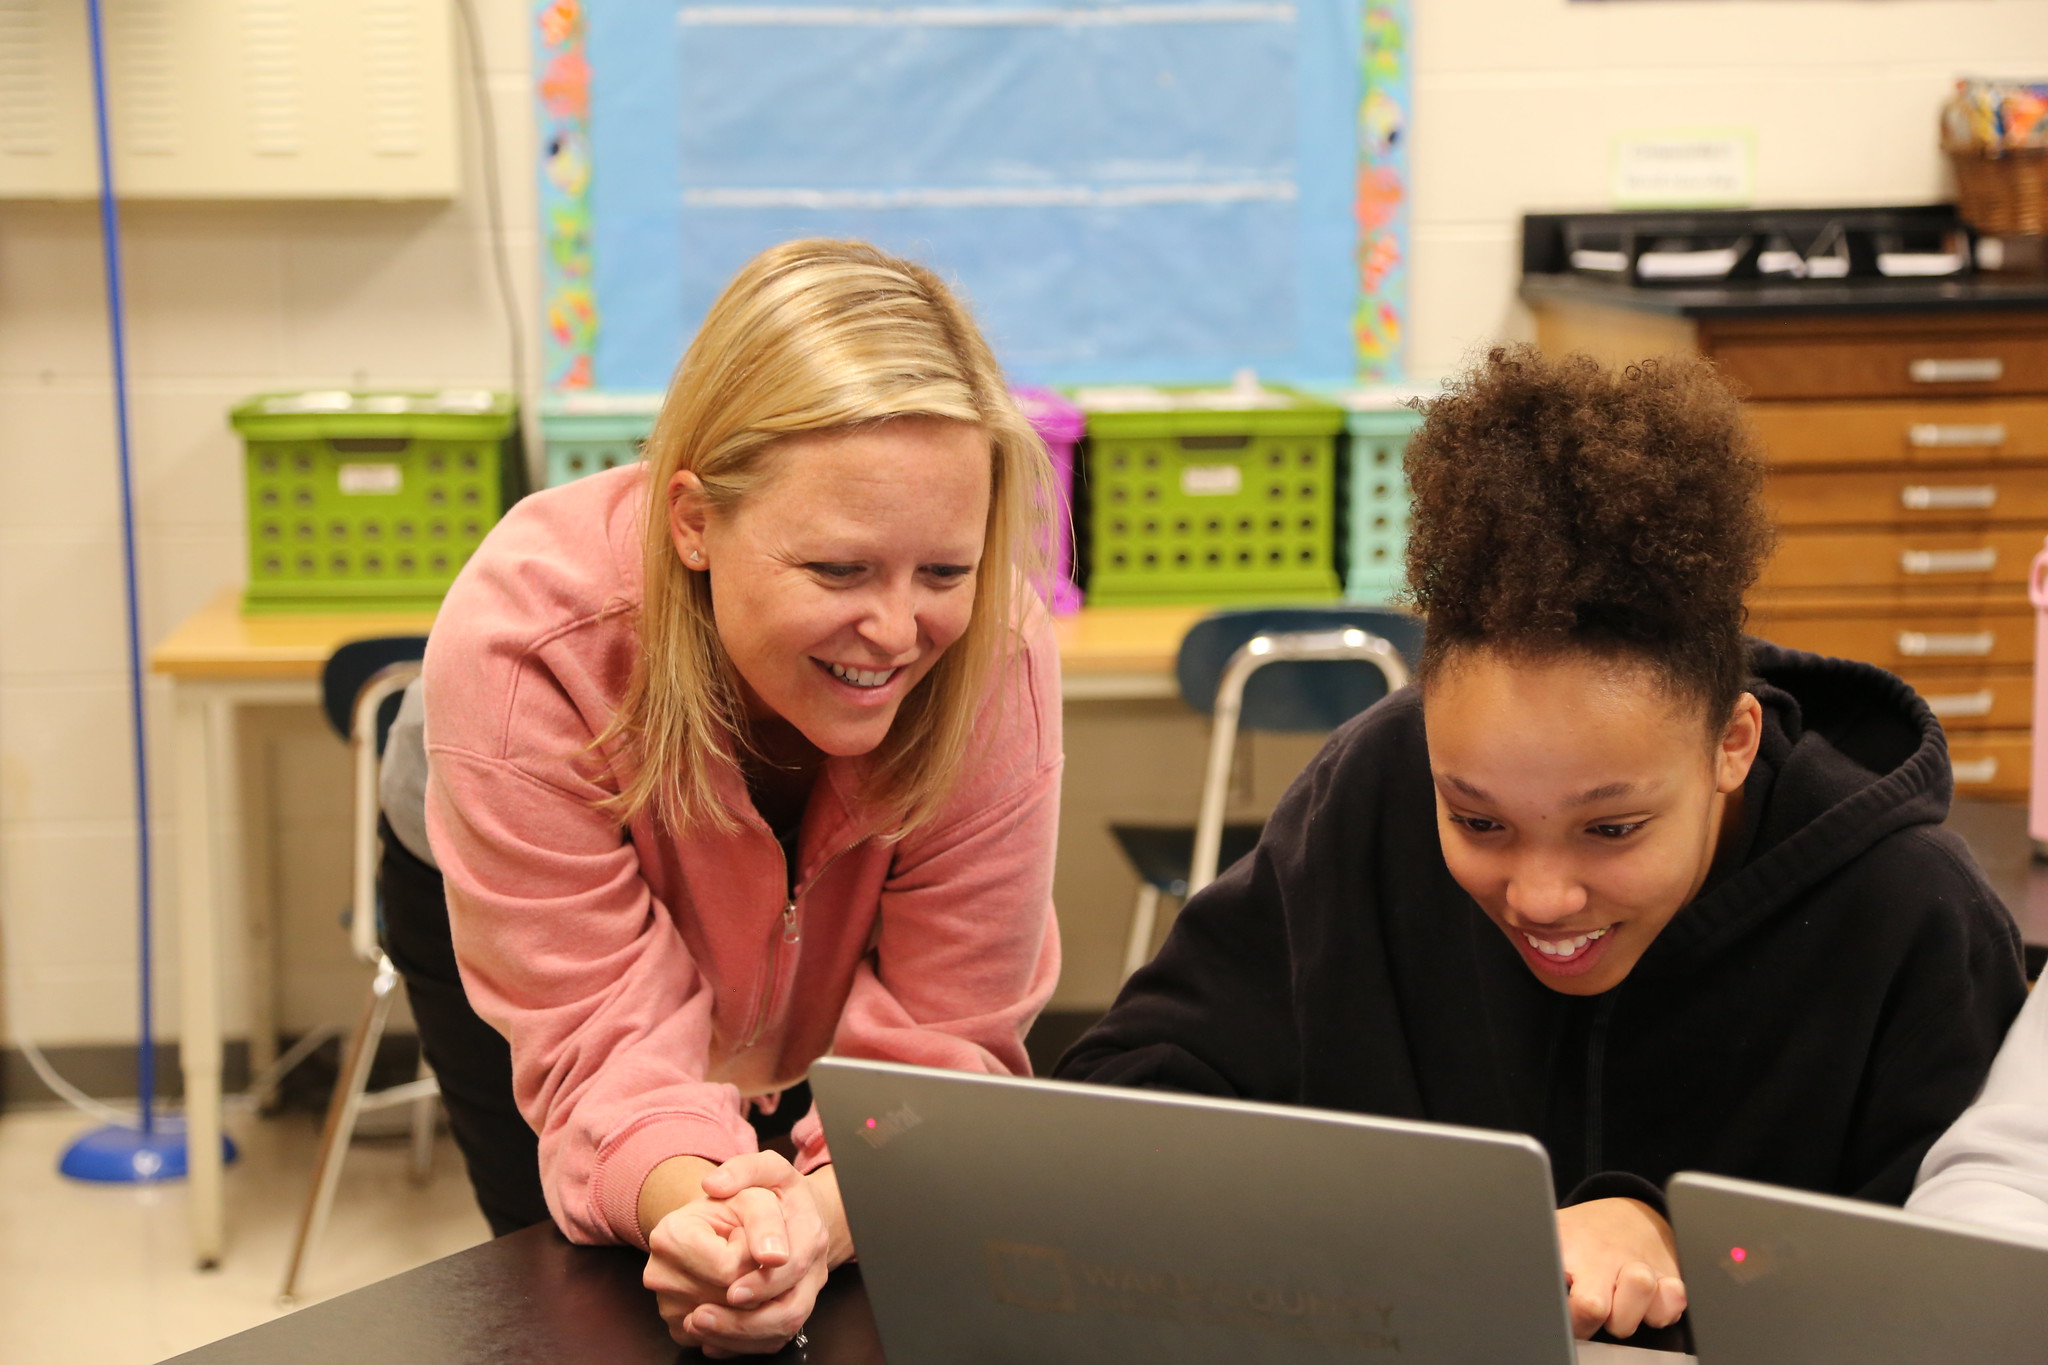 A teacher and student work together in front of a laptop in a classroom